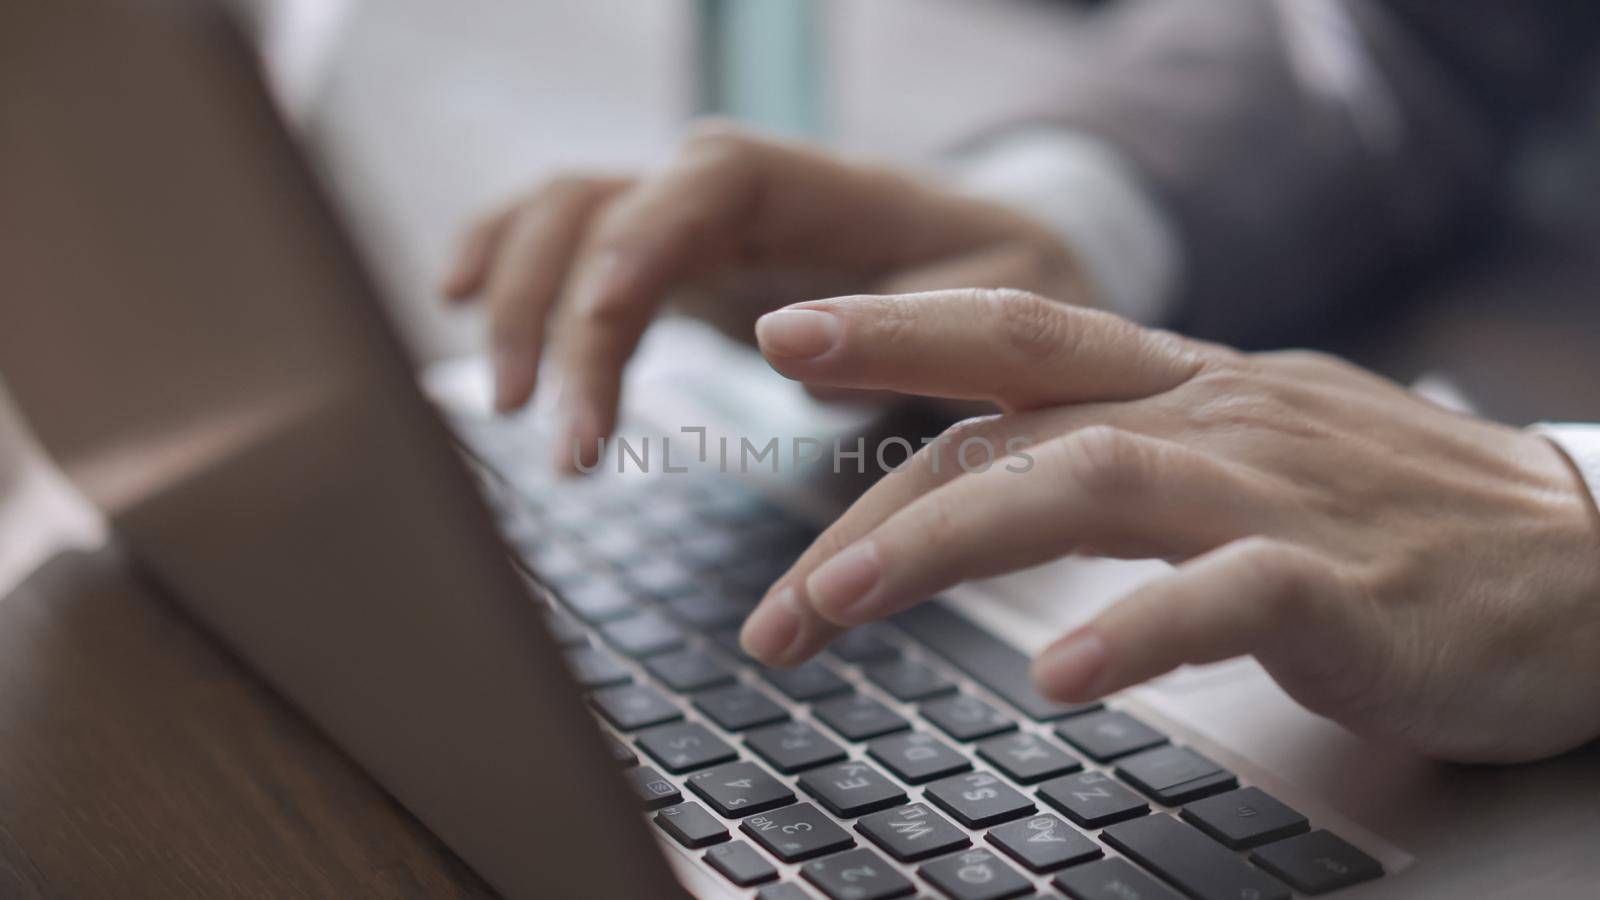 Business Woman In Suit Works With Laptop Sitting At Office Desk With Sanitizer On It, Close Up Of Female Hands Working On Laptop Keyboard, Quarantine Concept